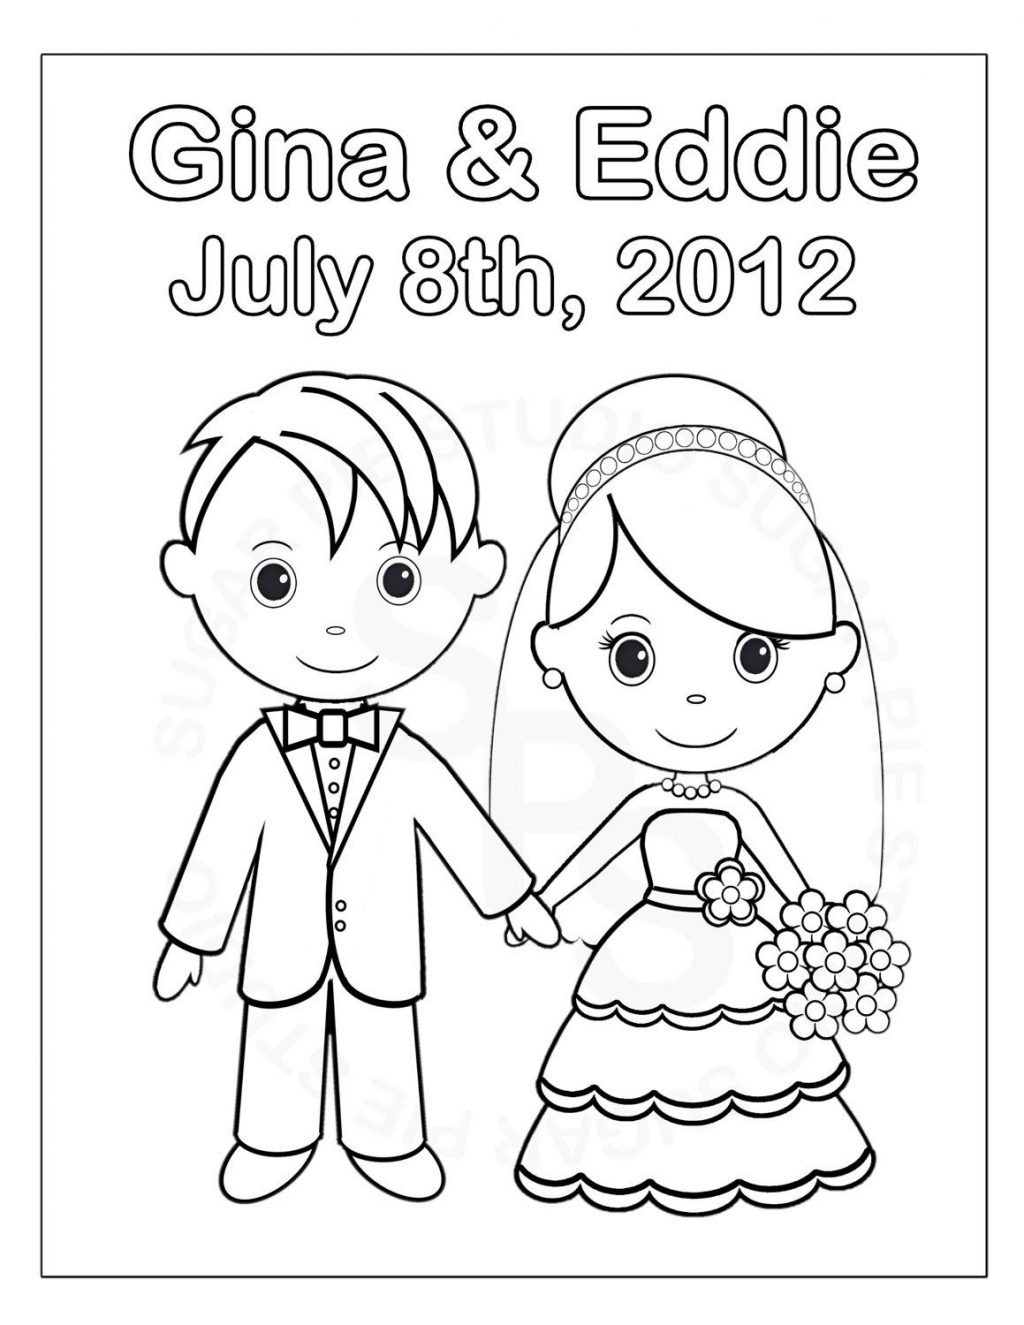 Customized Coloring Pages Coloring Pages Personalized Printable Bride Groom Wedding Party